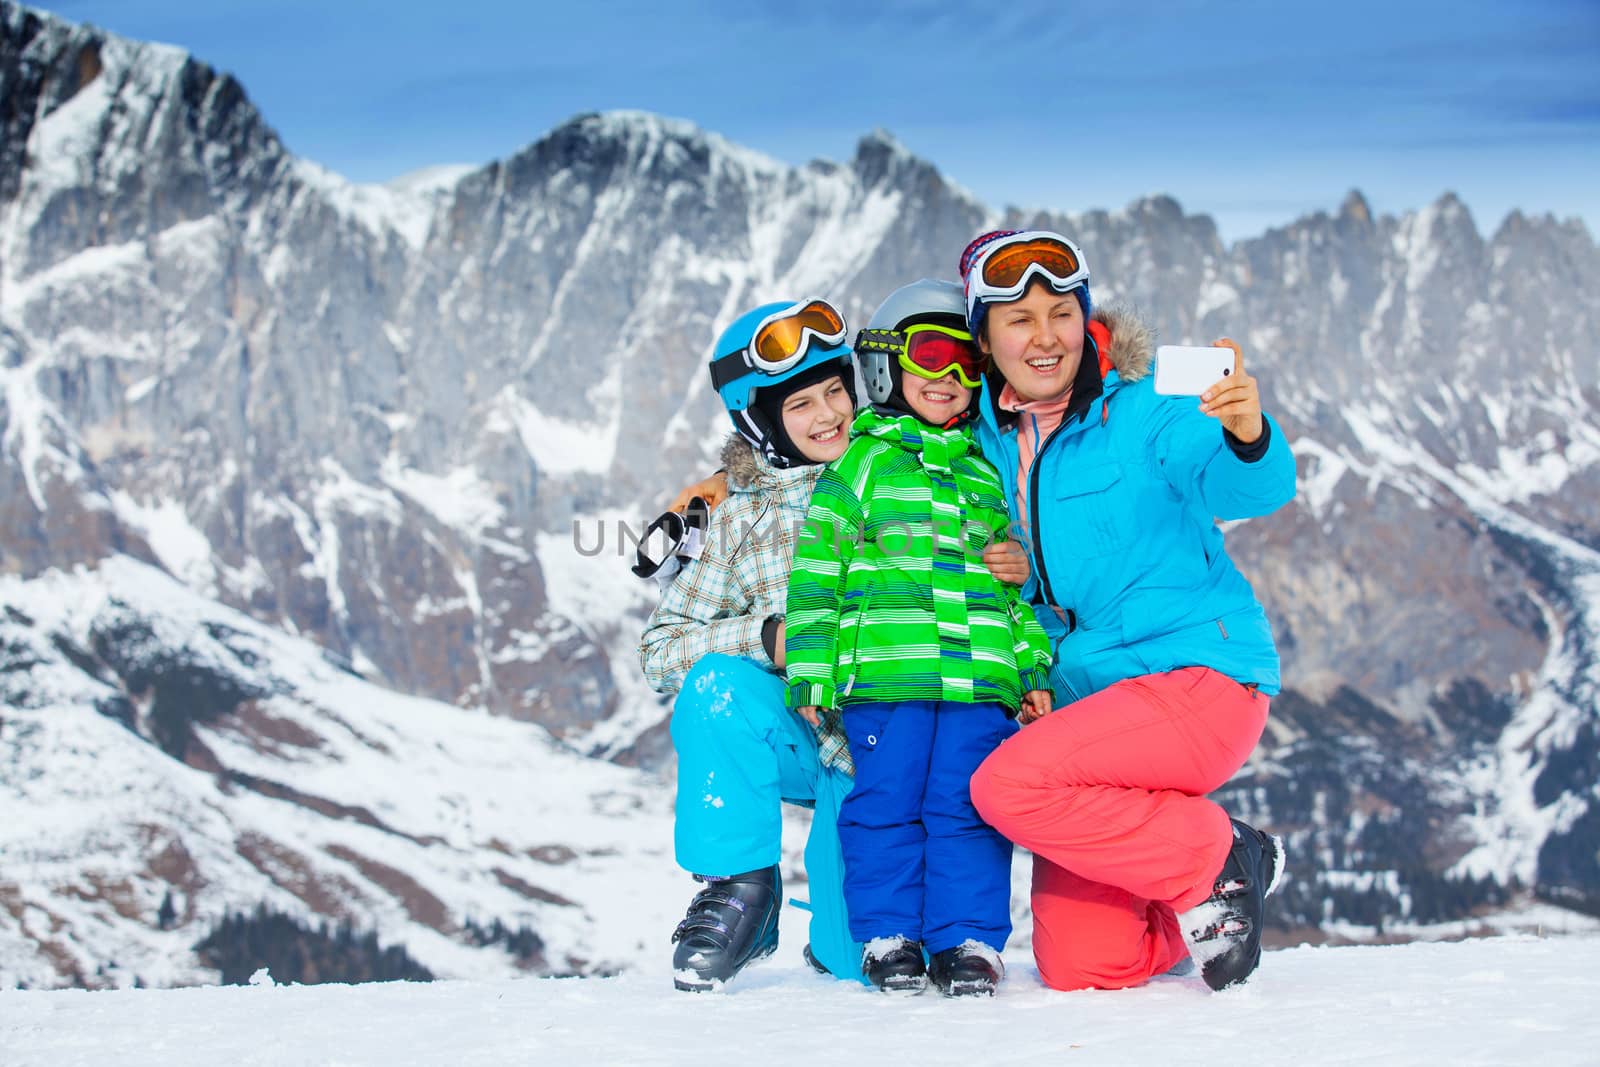 Ski, winter, snow, skiers, sun and fun - family photographed on phone during winter vacations.